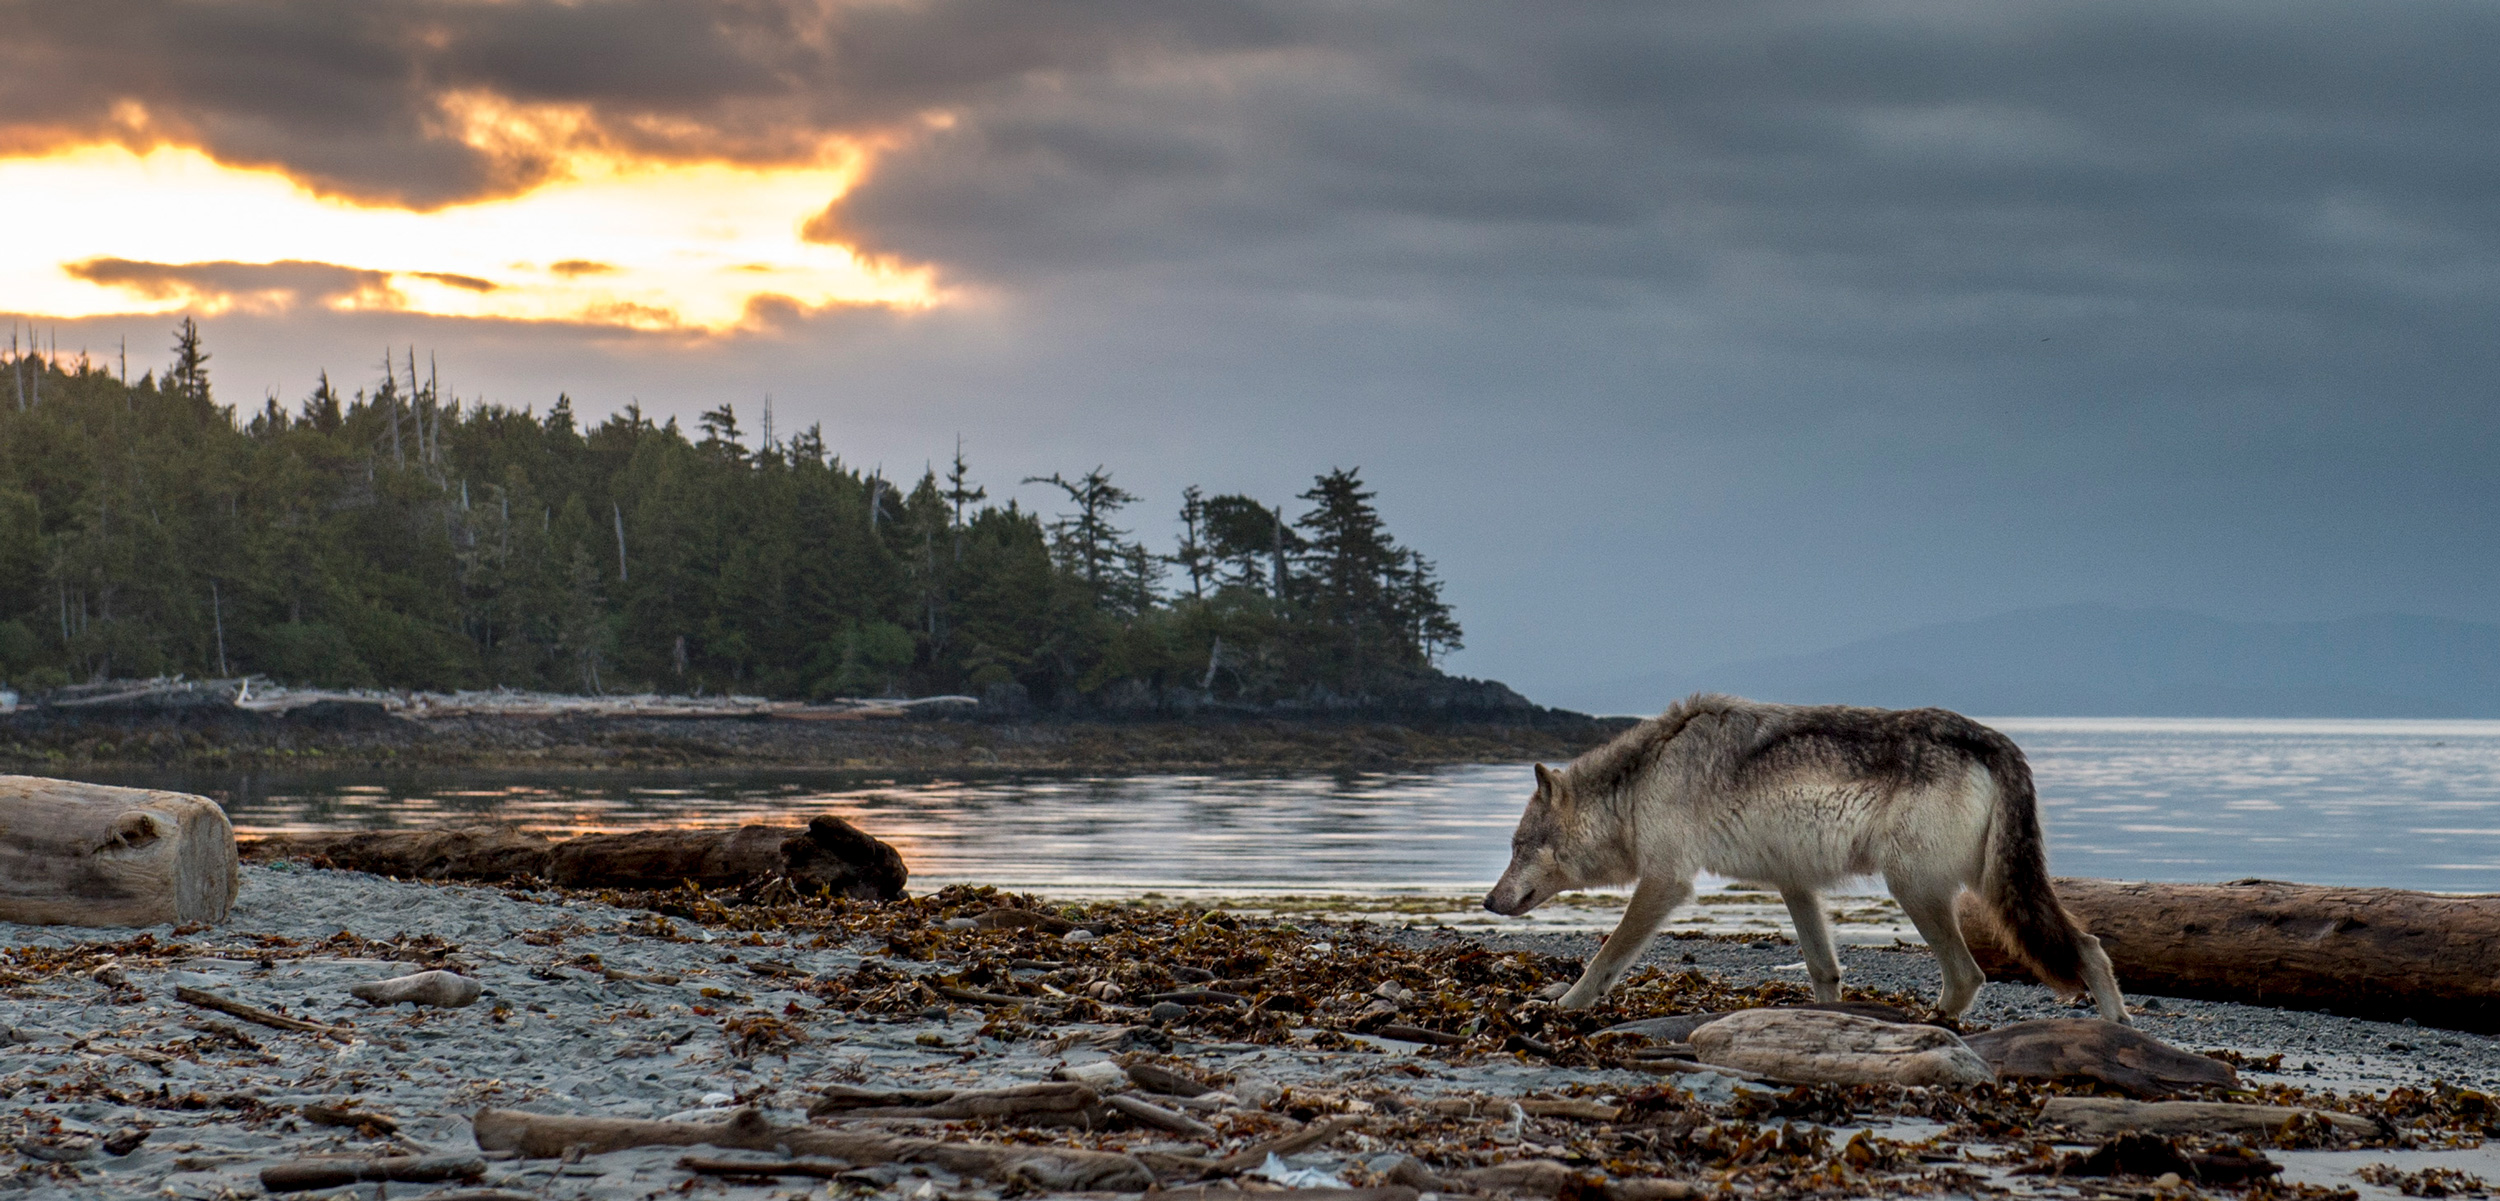 In the 20th century, humans exterminated the gray wolf population of British Columbia’s Vancouver Island, the largest island on the west coast of North America. The animals repopulated the island by the end of the century, and now live side by side with people. Photo by April Bencze